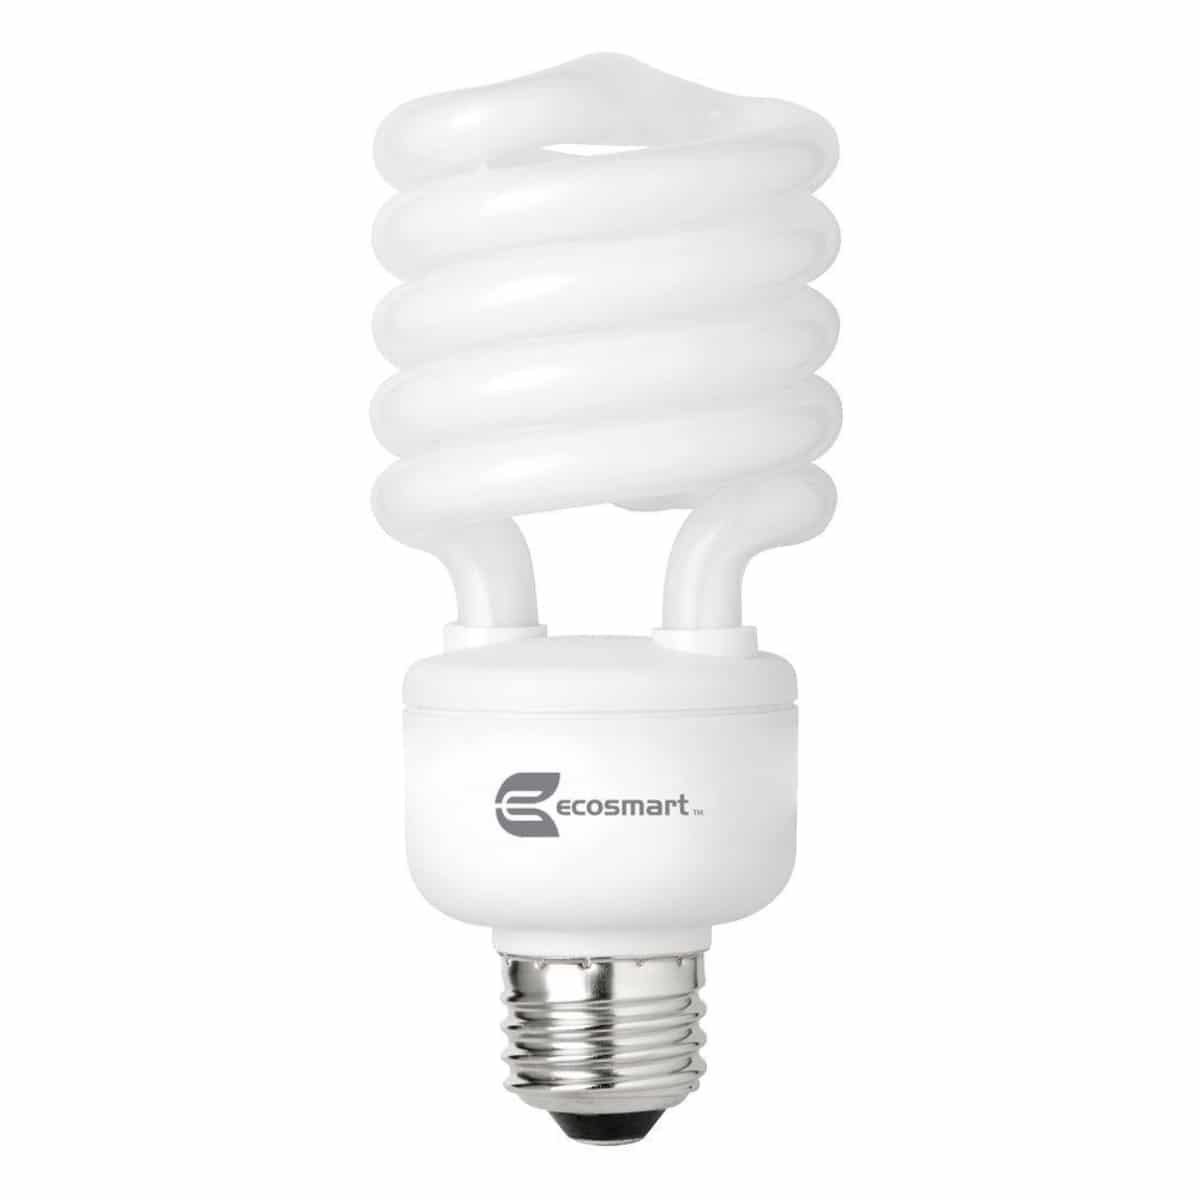 How To Choose The Right Light Bulb For, How To Dispose Of Led Light Bulbs Uk